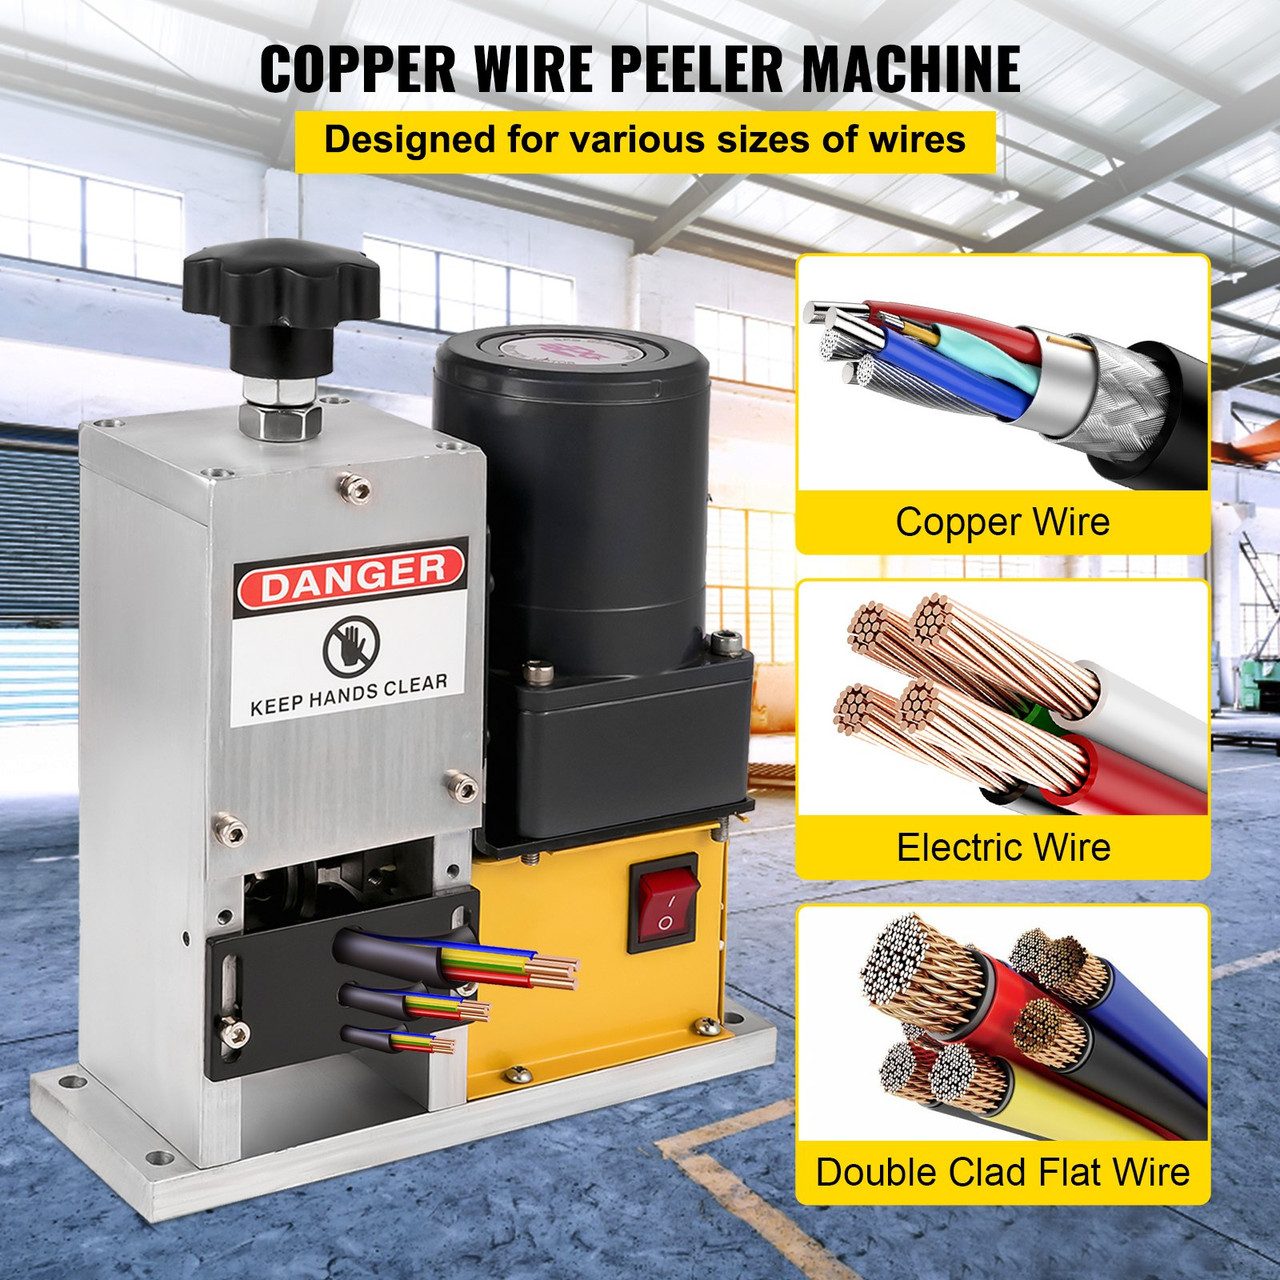 Cable Wire Stripping Machine 0.04"-1.18", Portable Scrap Cable Stripper With Gear Motor, Electric Wire Stripping Machine Compact Aluminum Alloy Structure, Automatic Wire Stripper with a Blade